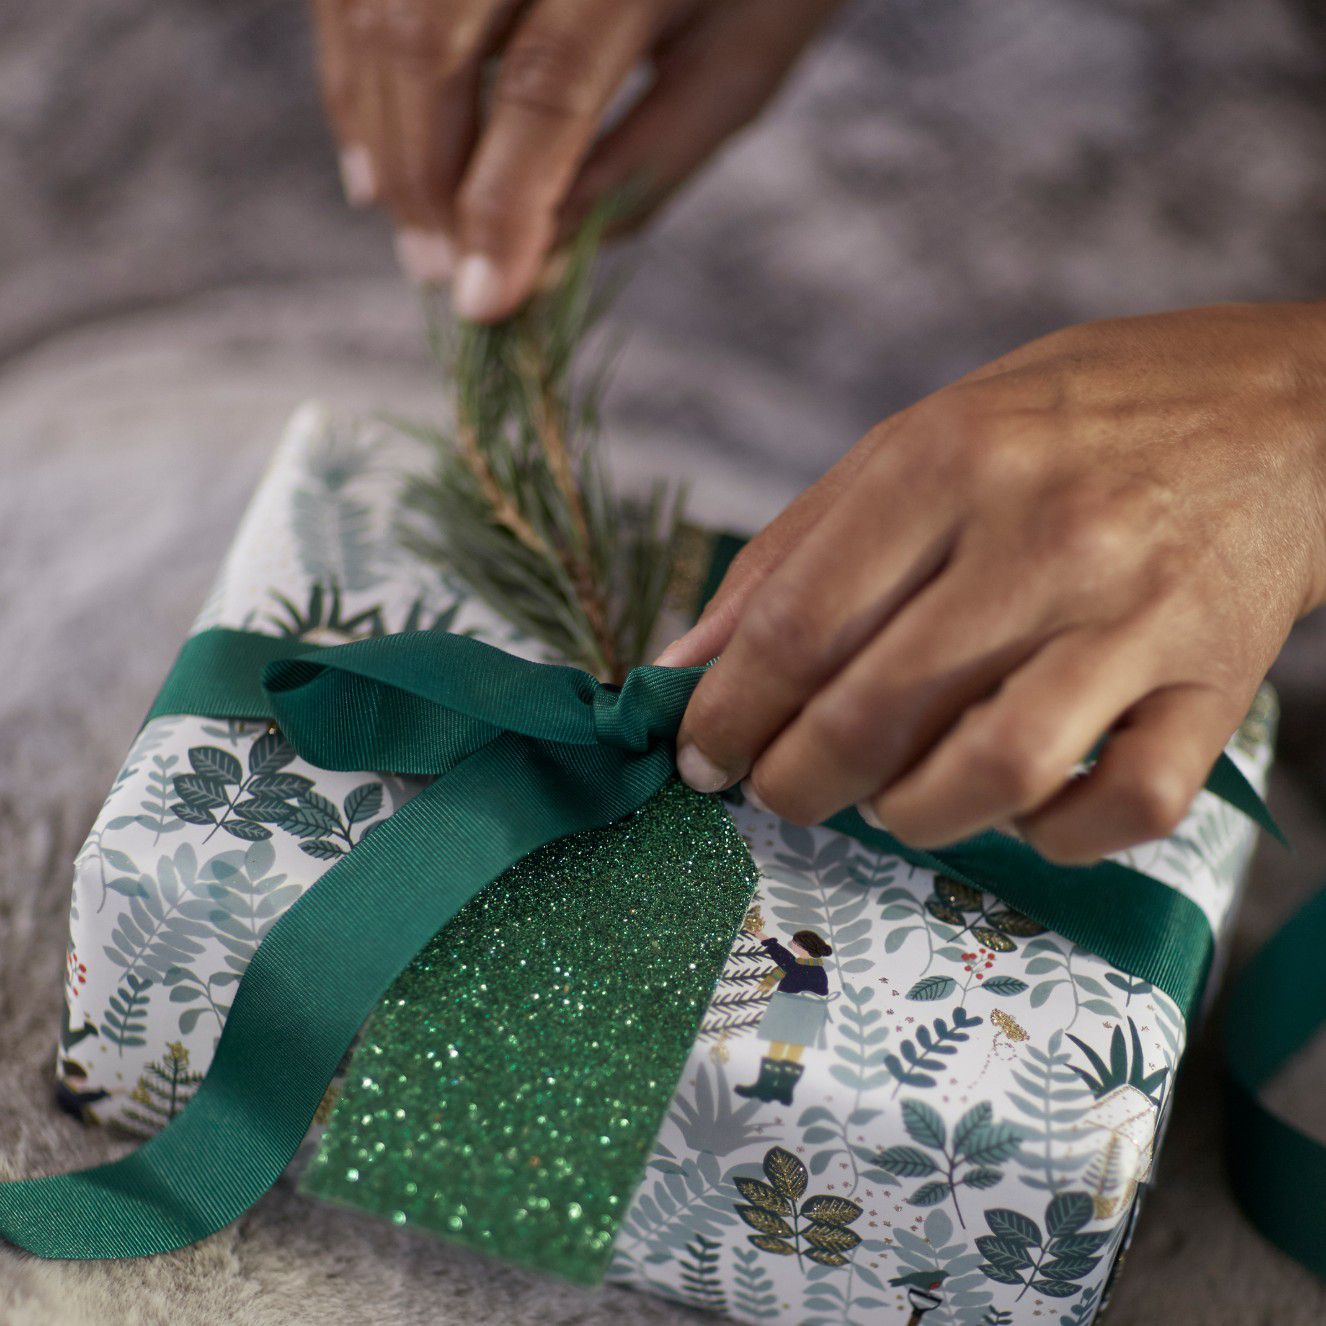 Person wrapping gift